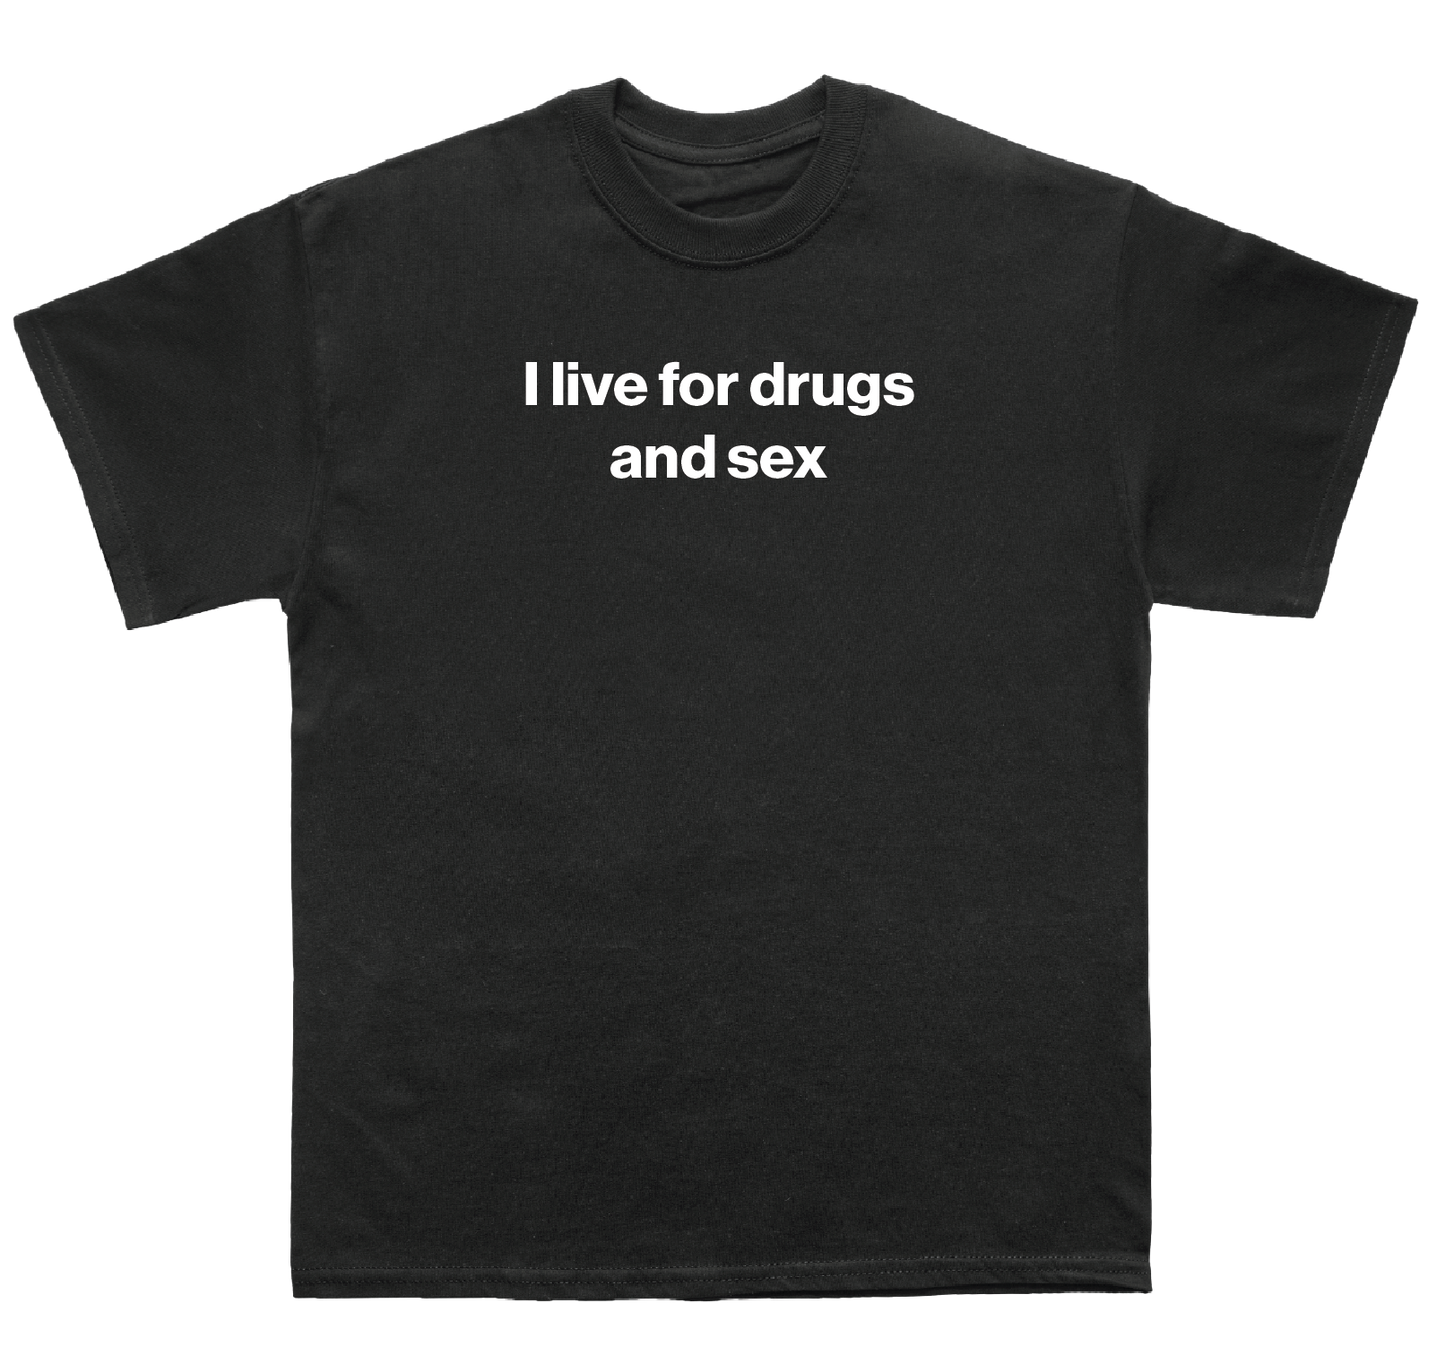 I live for drugs and sex shirt